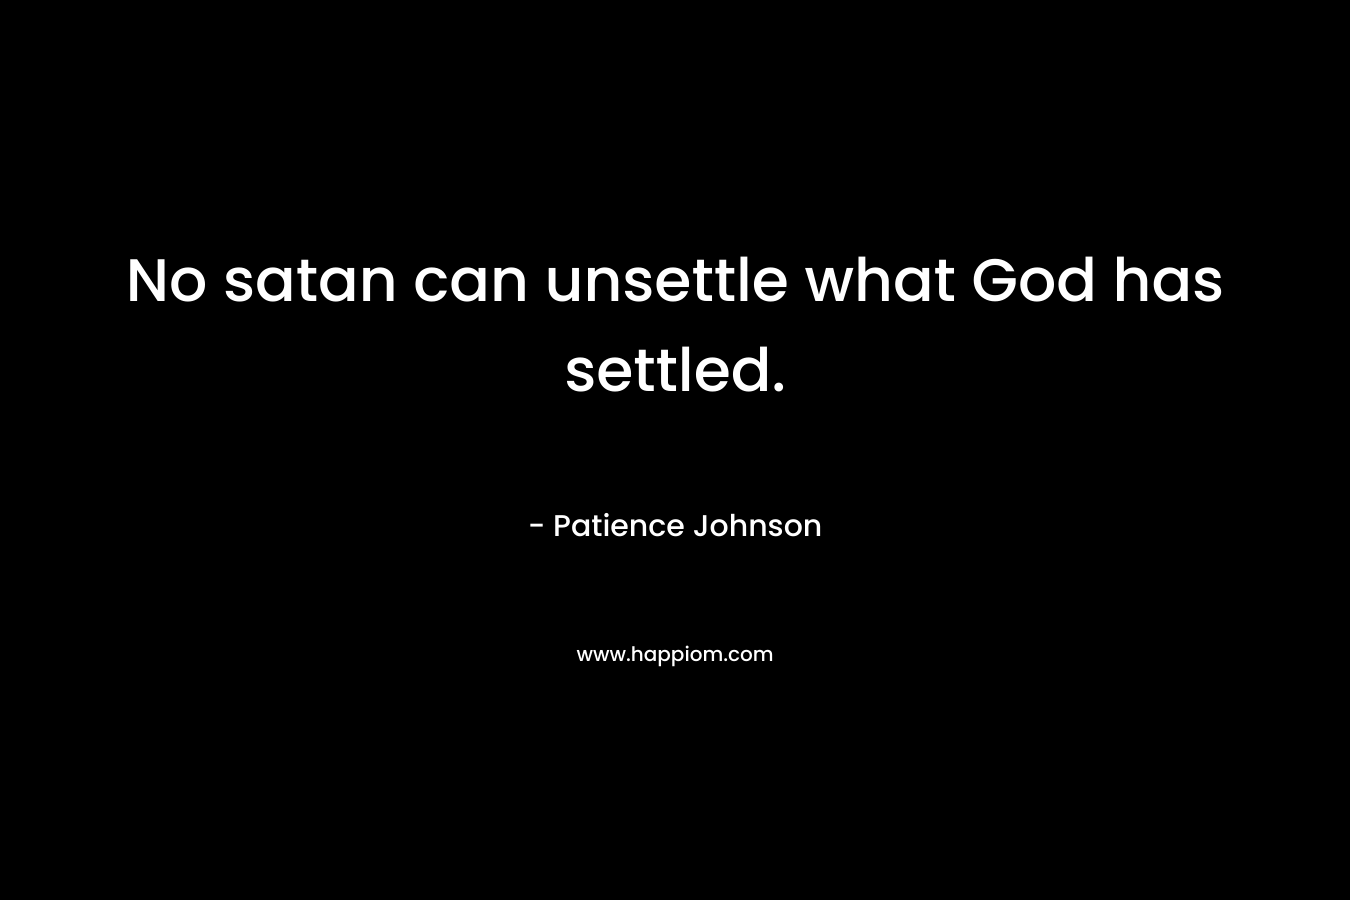 No satan can unsettle what God has settled.